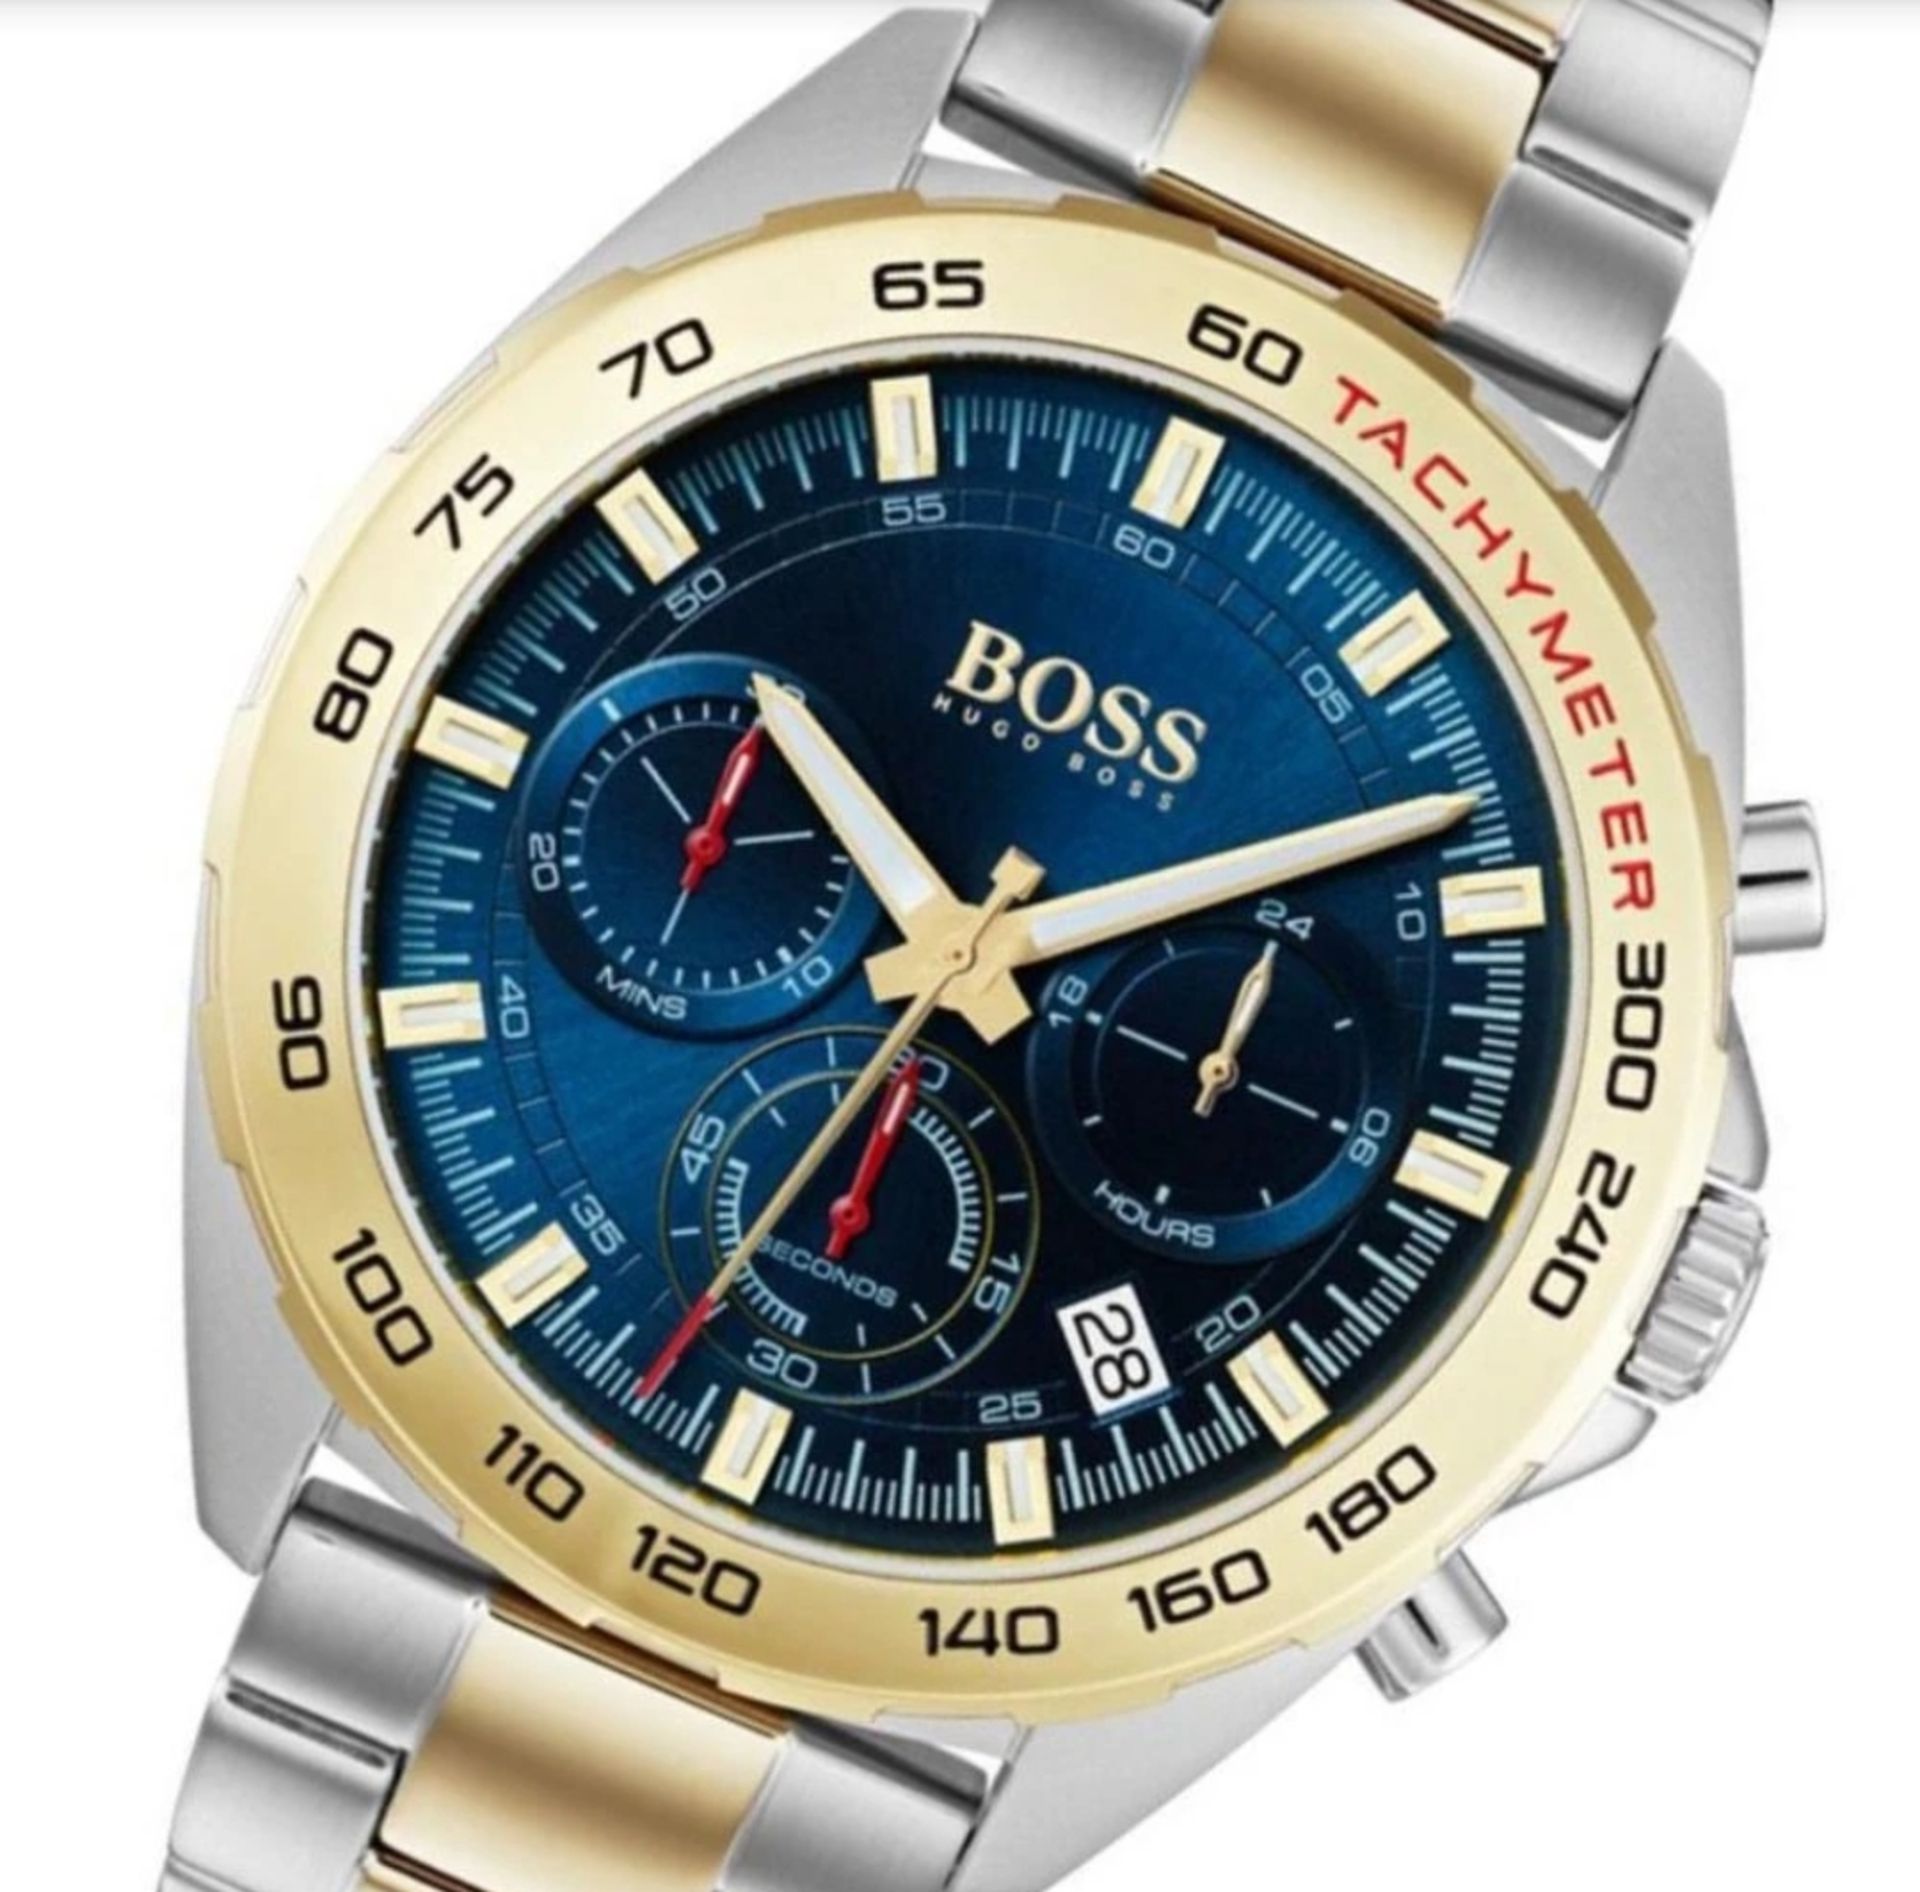 Hugo Boss 1513667 Men's Sport Intensity Two Tone Gold & Silver Chronograph Watch - Image 2 of 5